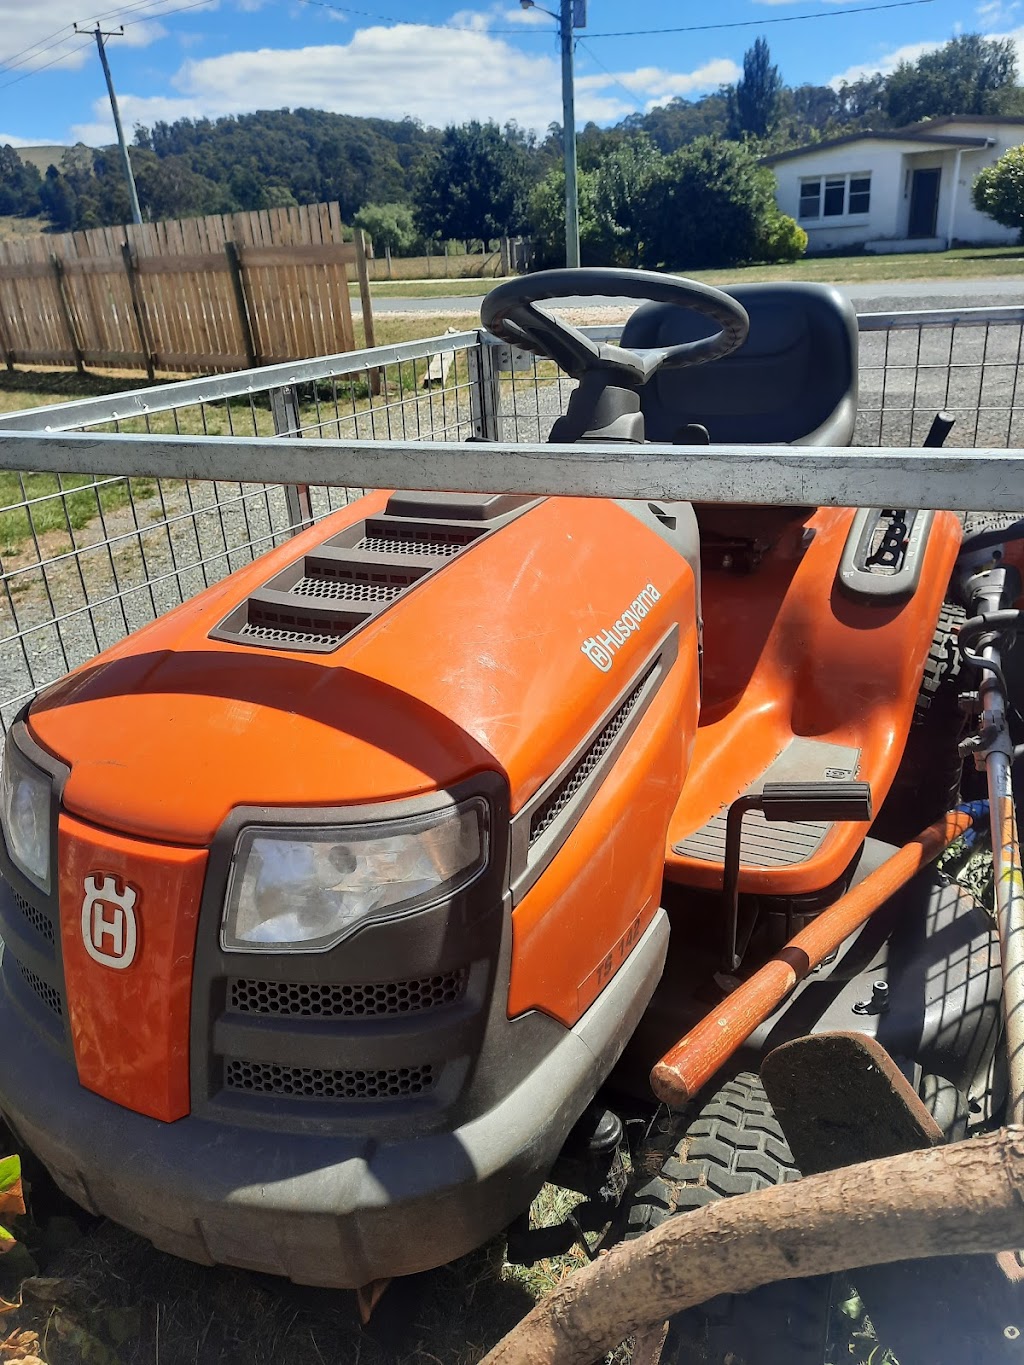 Short Back and Sides Lawn Mowing and Property Maintenance | 97 Foster St, Railton TAS 7305, Australia | Phone: 0456 782 056